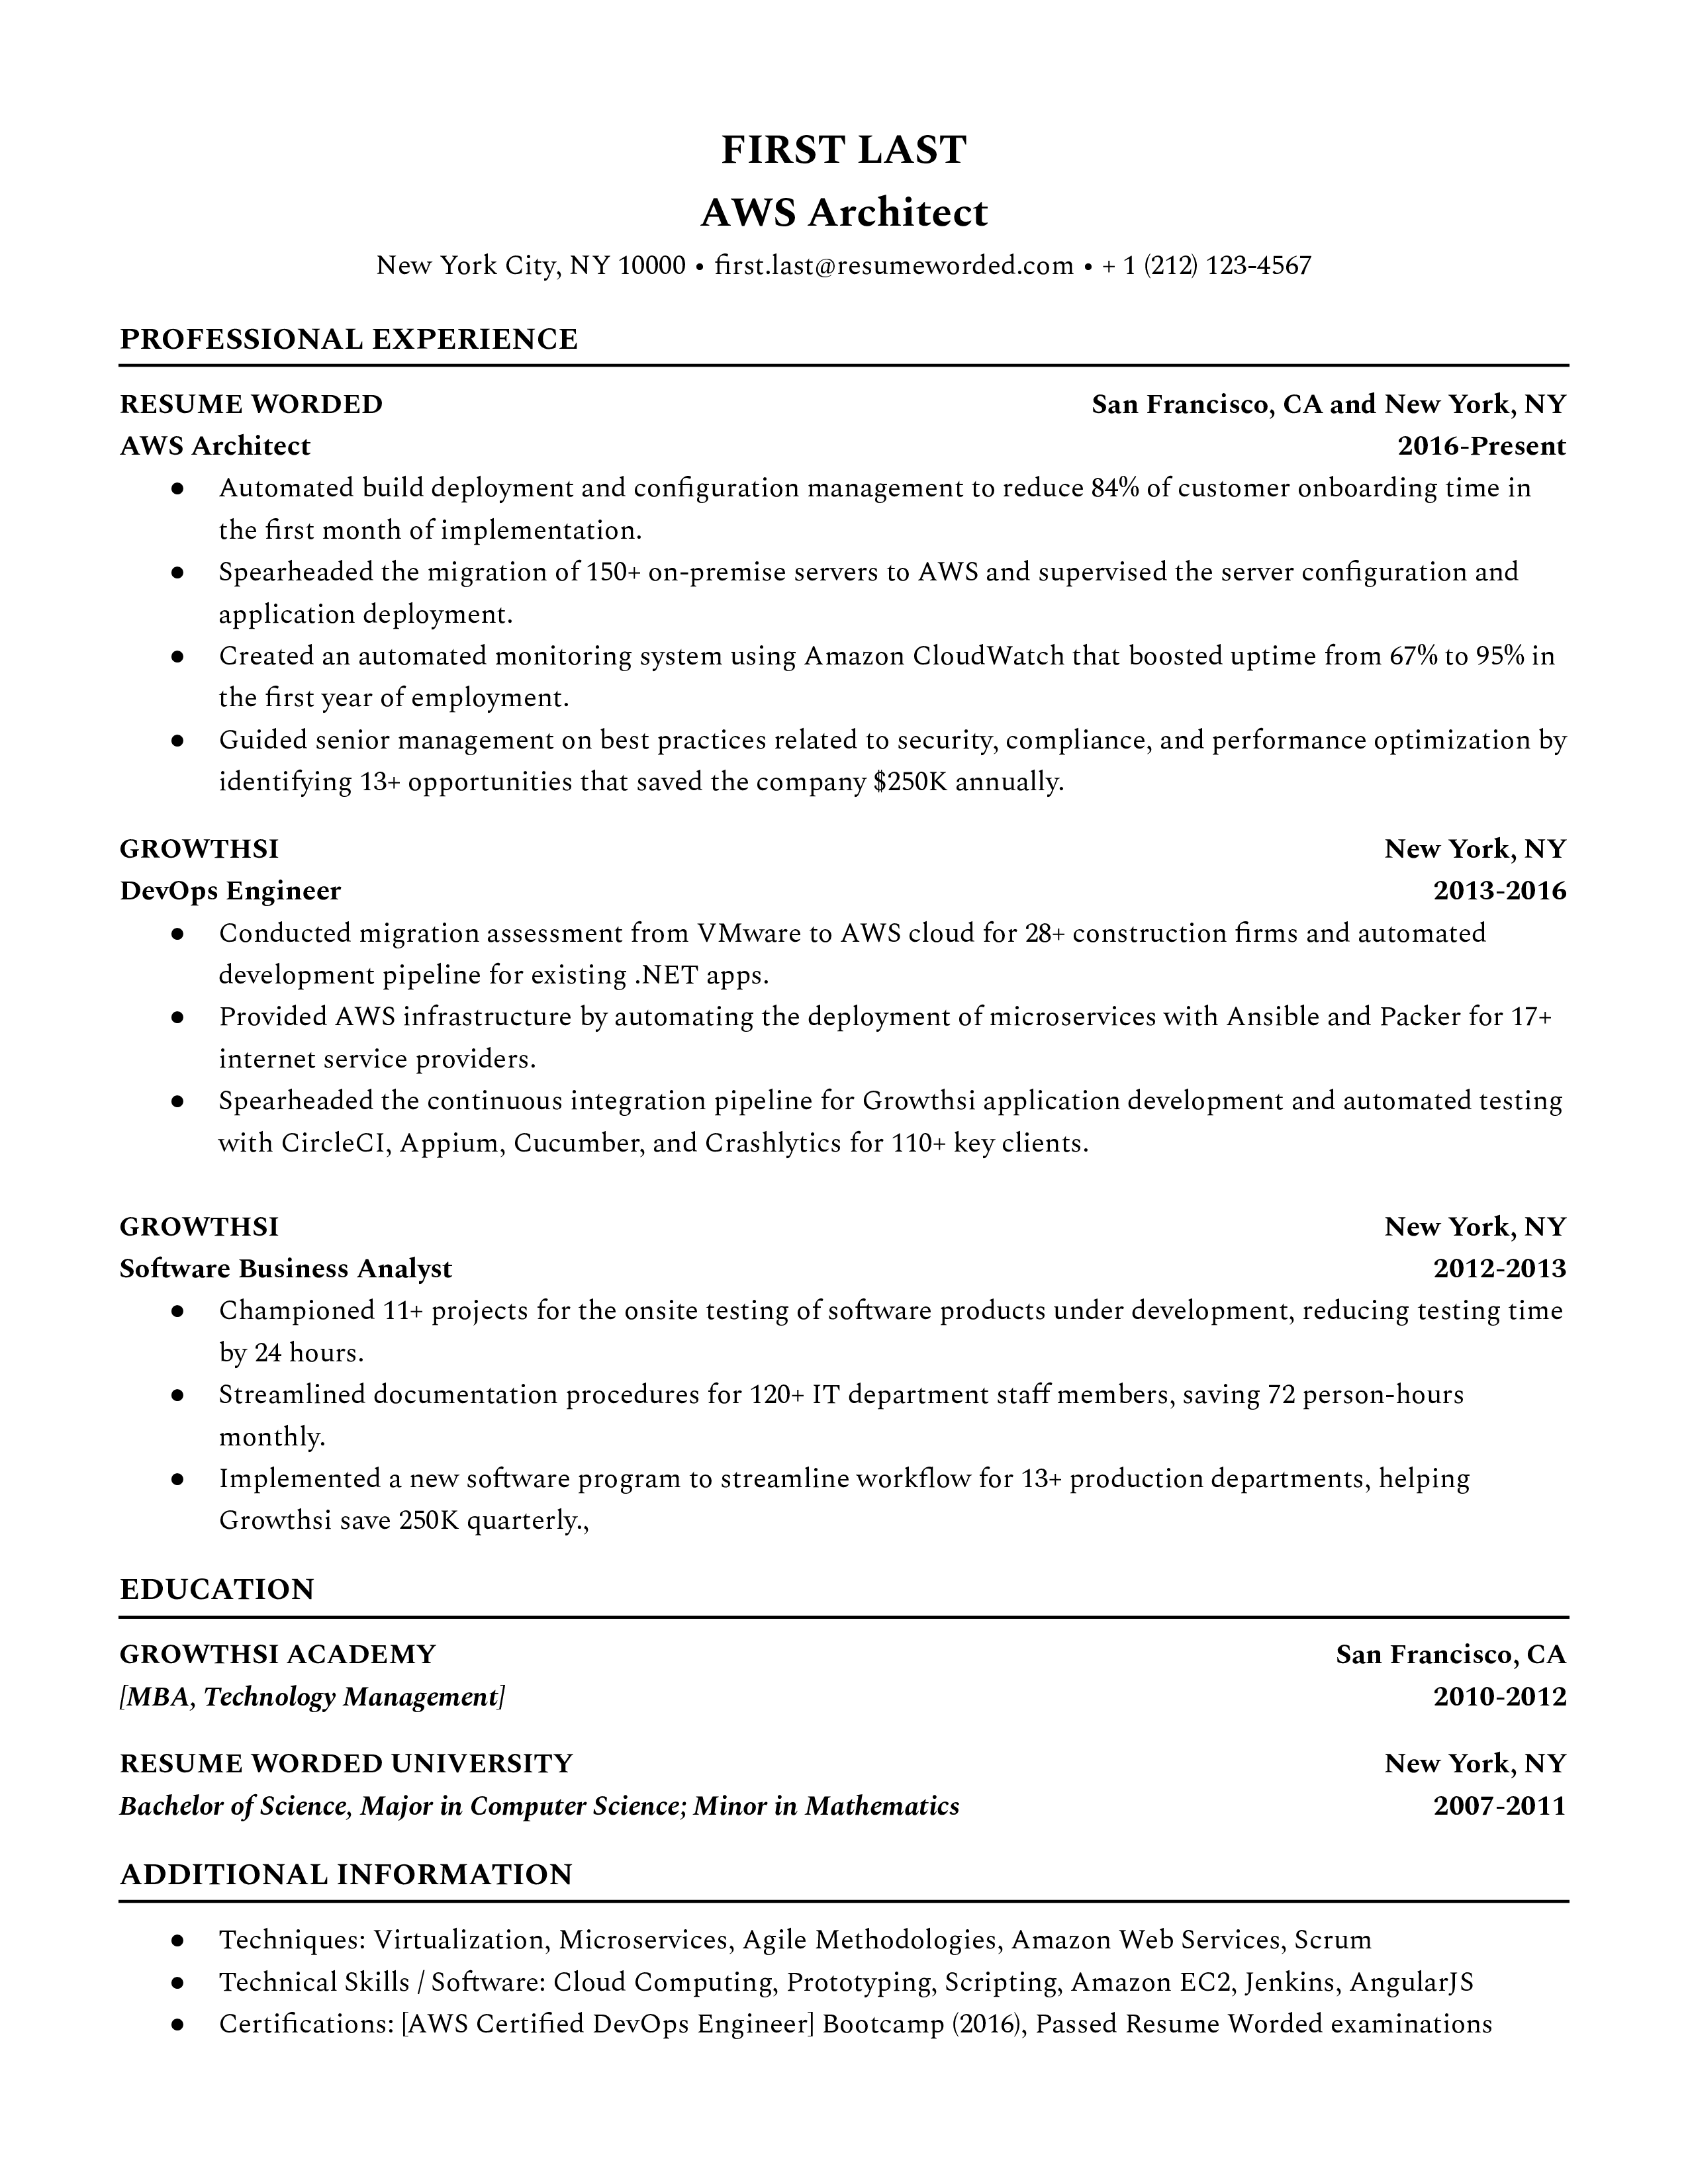 An AWS architect resume template highlighting academic background.